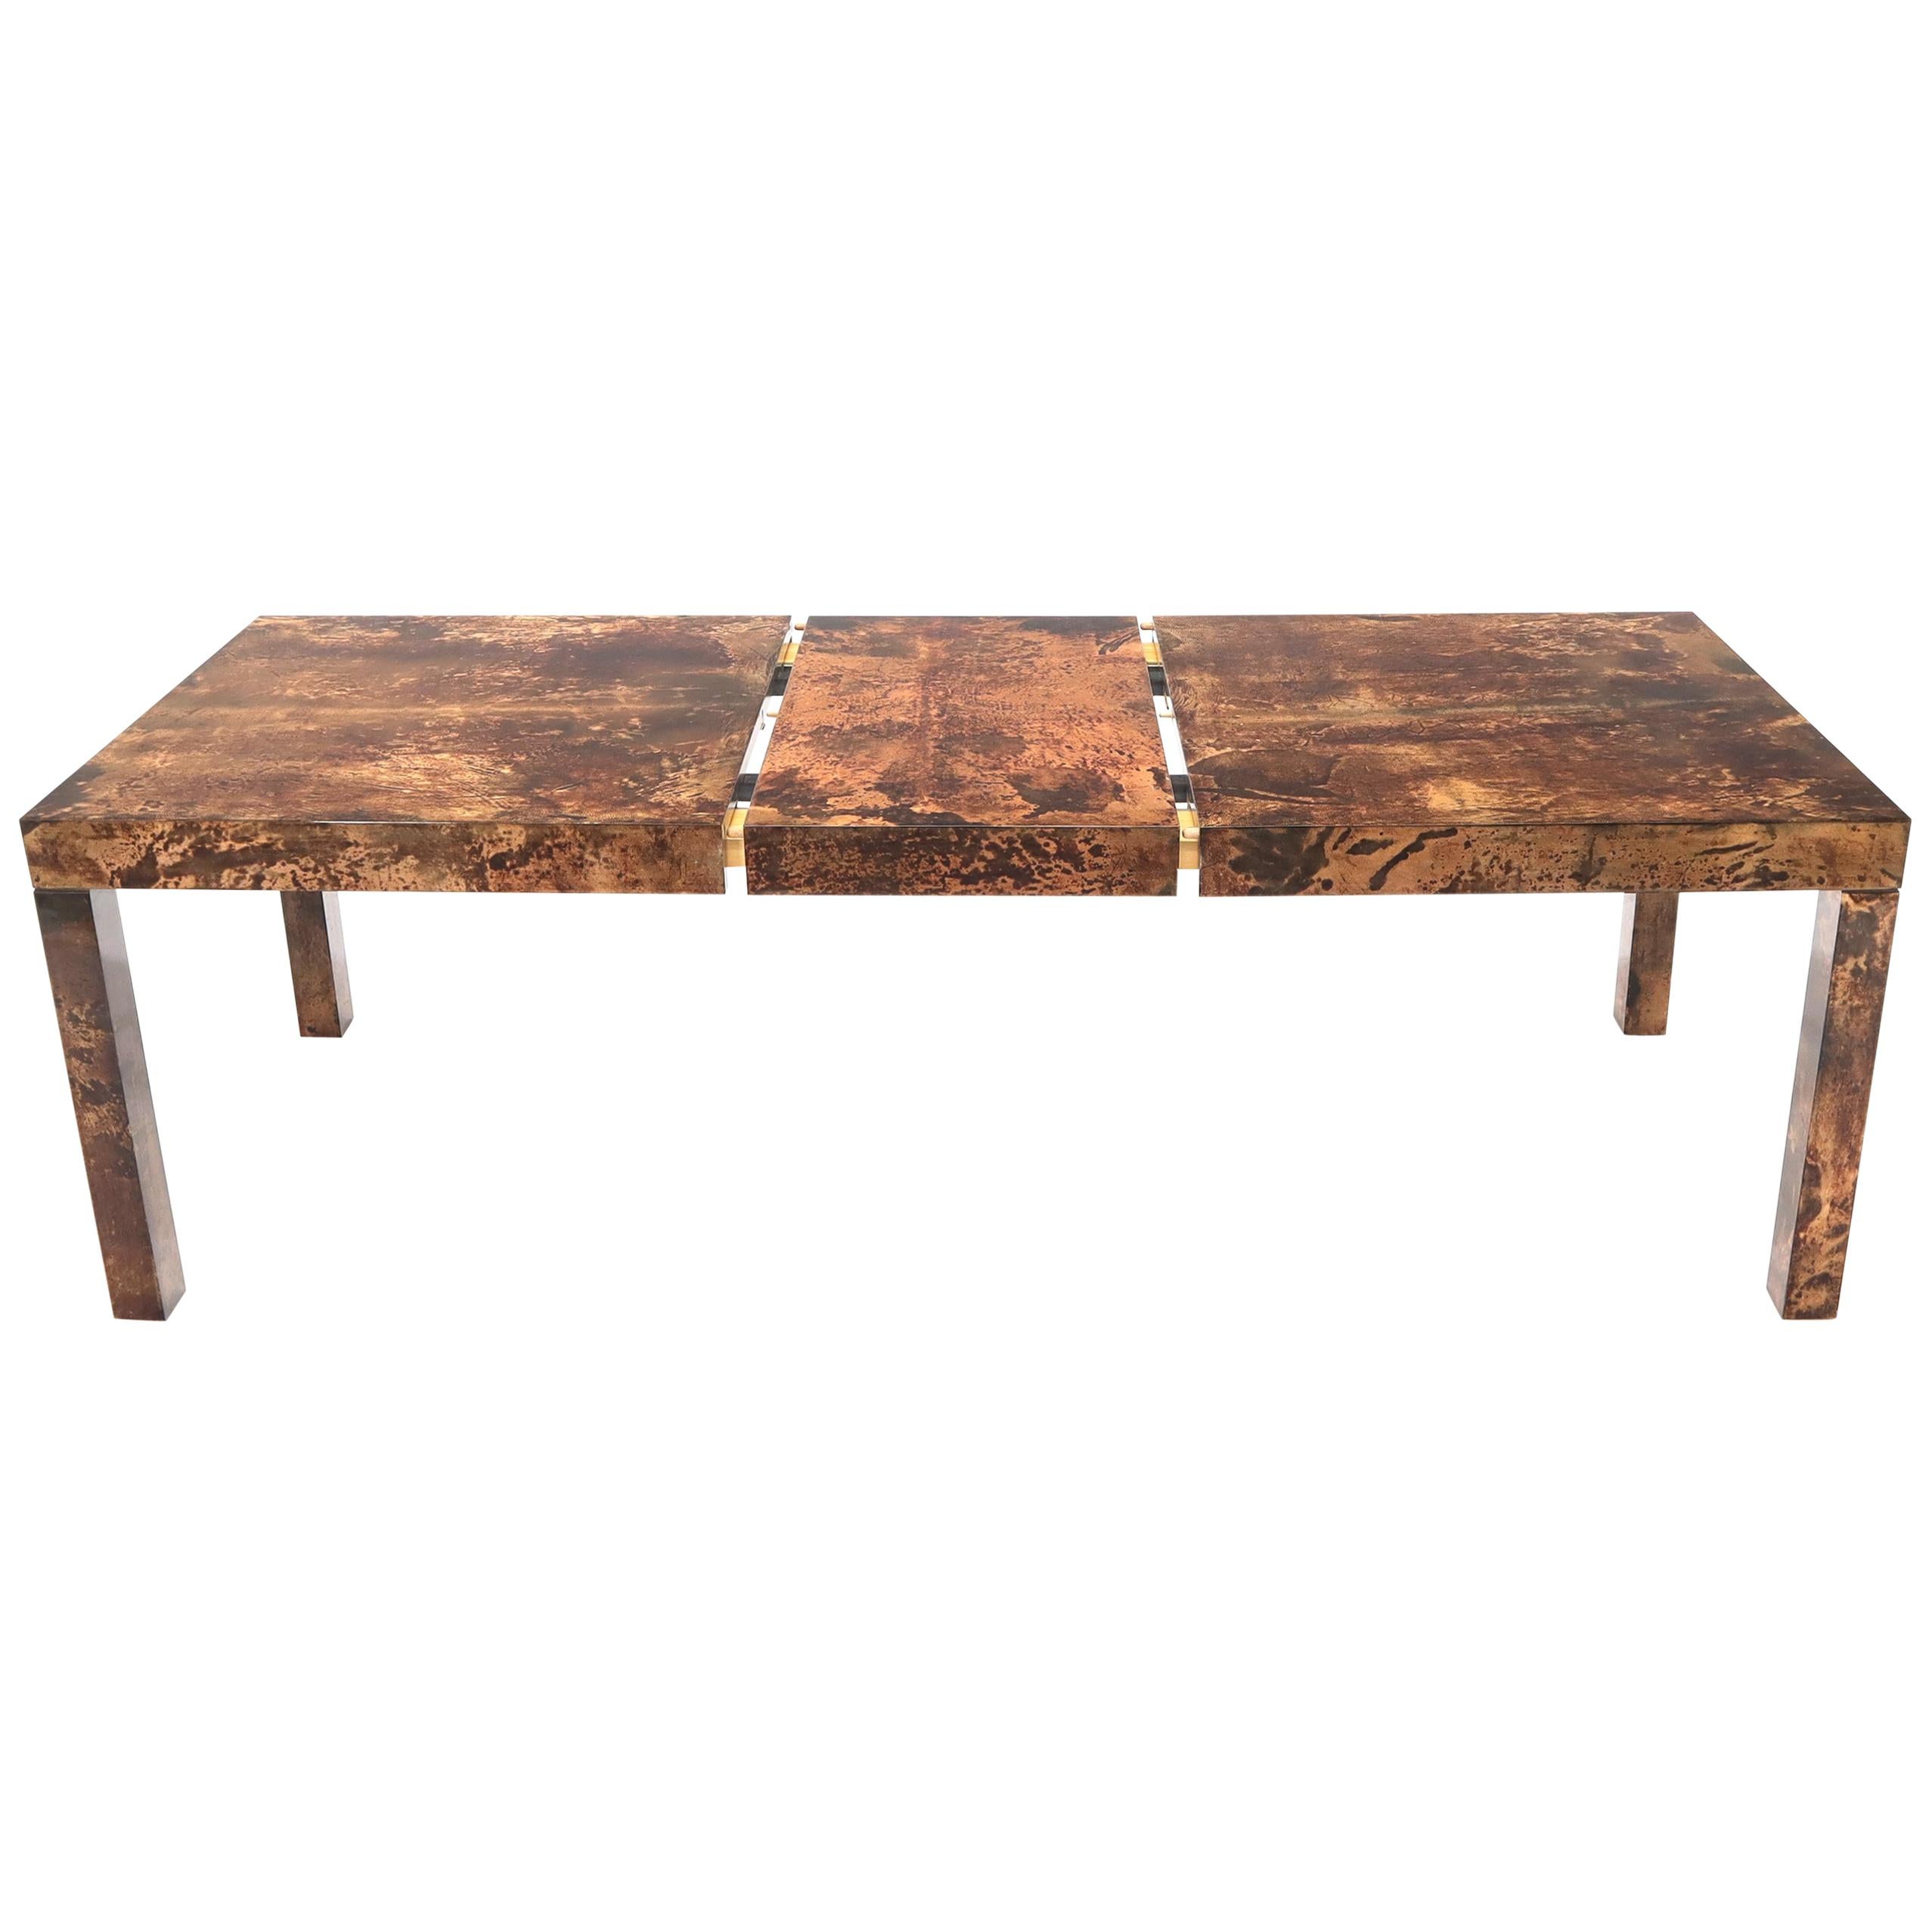 Italian Aldo Tura Goat Skin Parchment Rectangle Dining Table with One Leaf Board